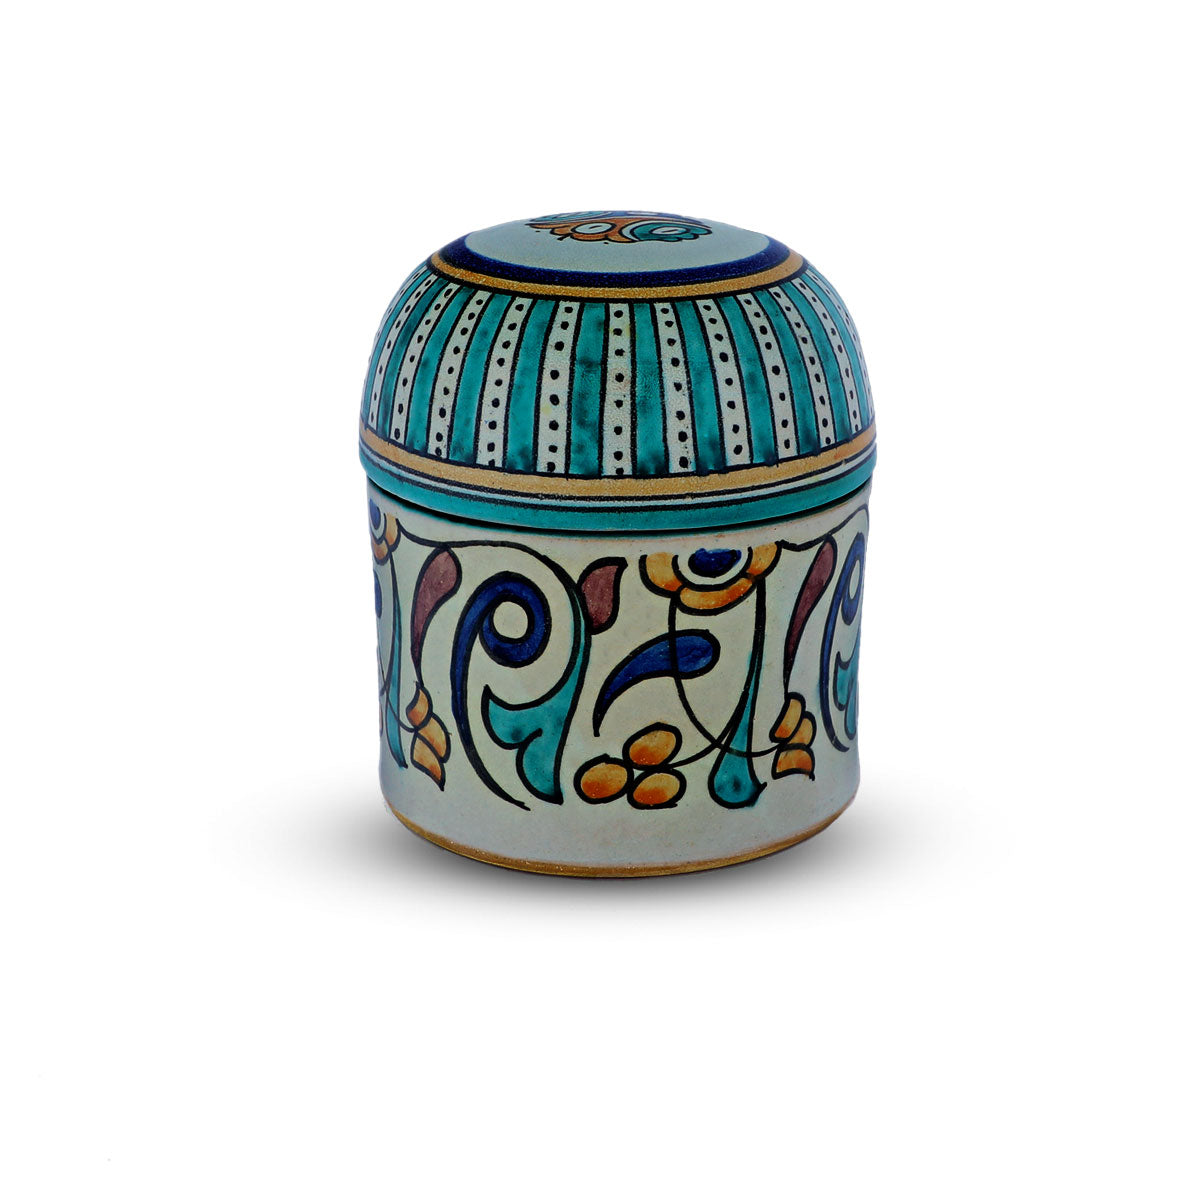 Traditionally Handmade & Hand-Painted Moroccan Clay Storage Canister